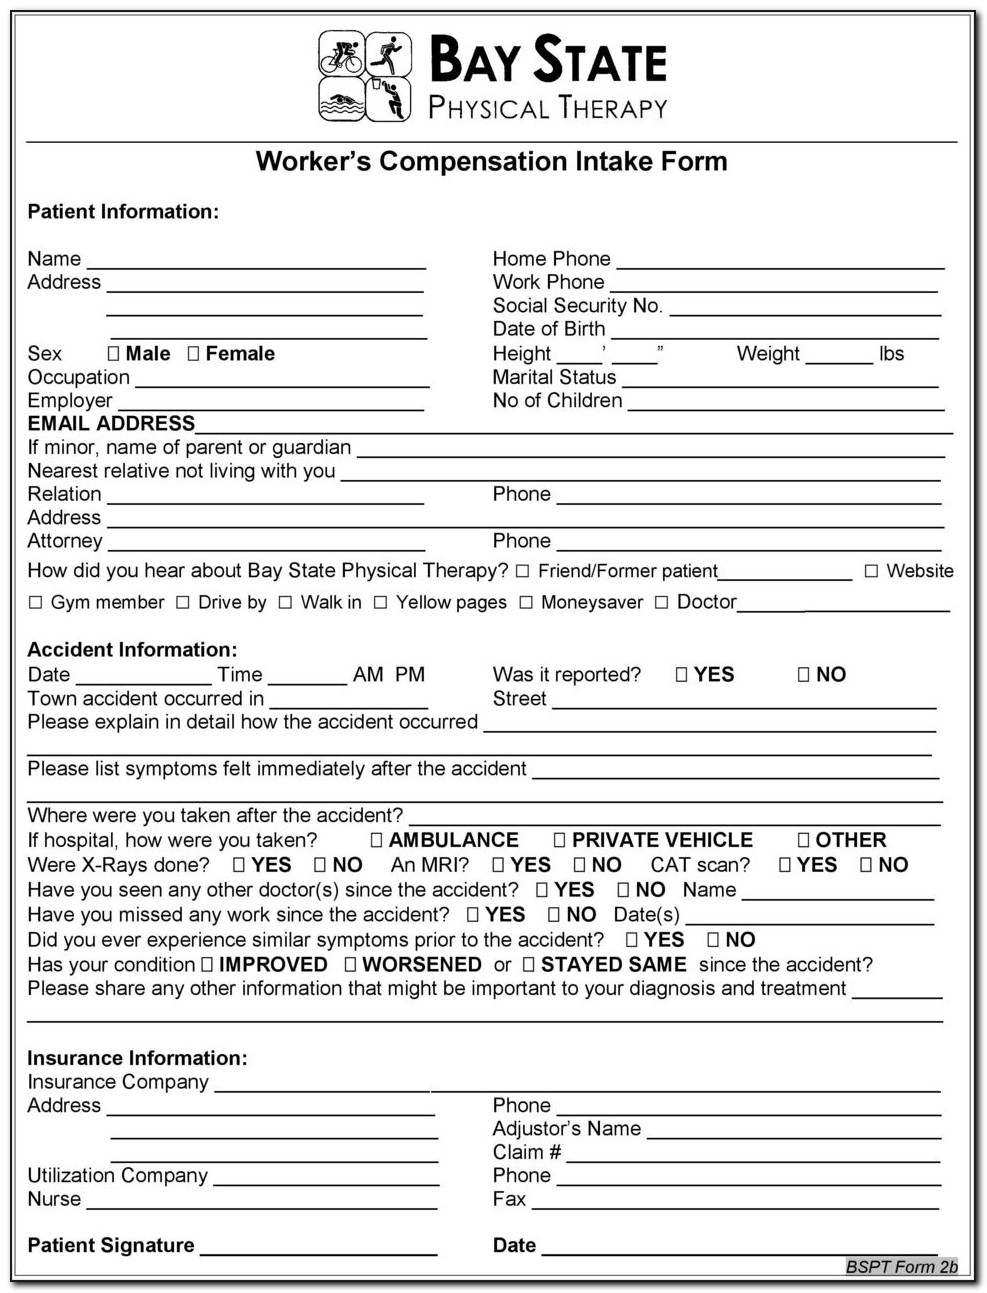 Sedgwick Workers Compensation Standard Intake Form